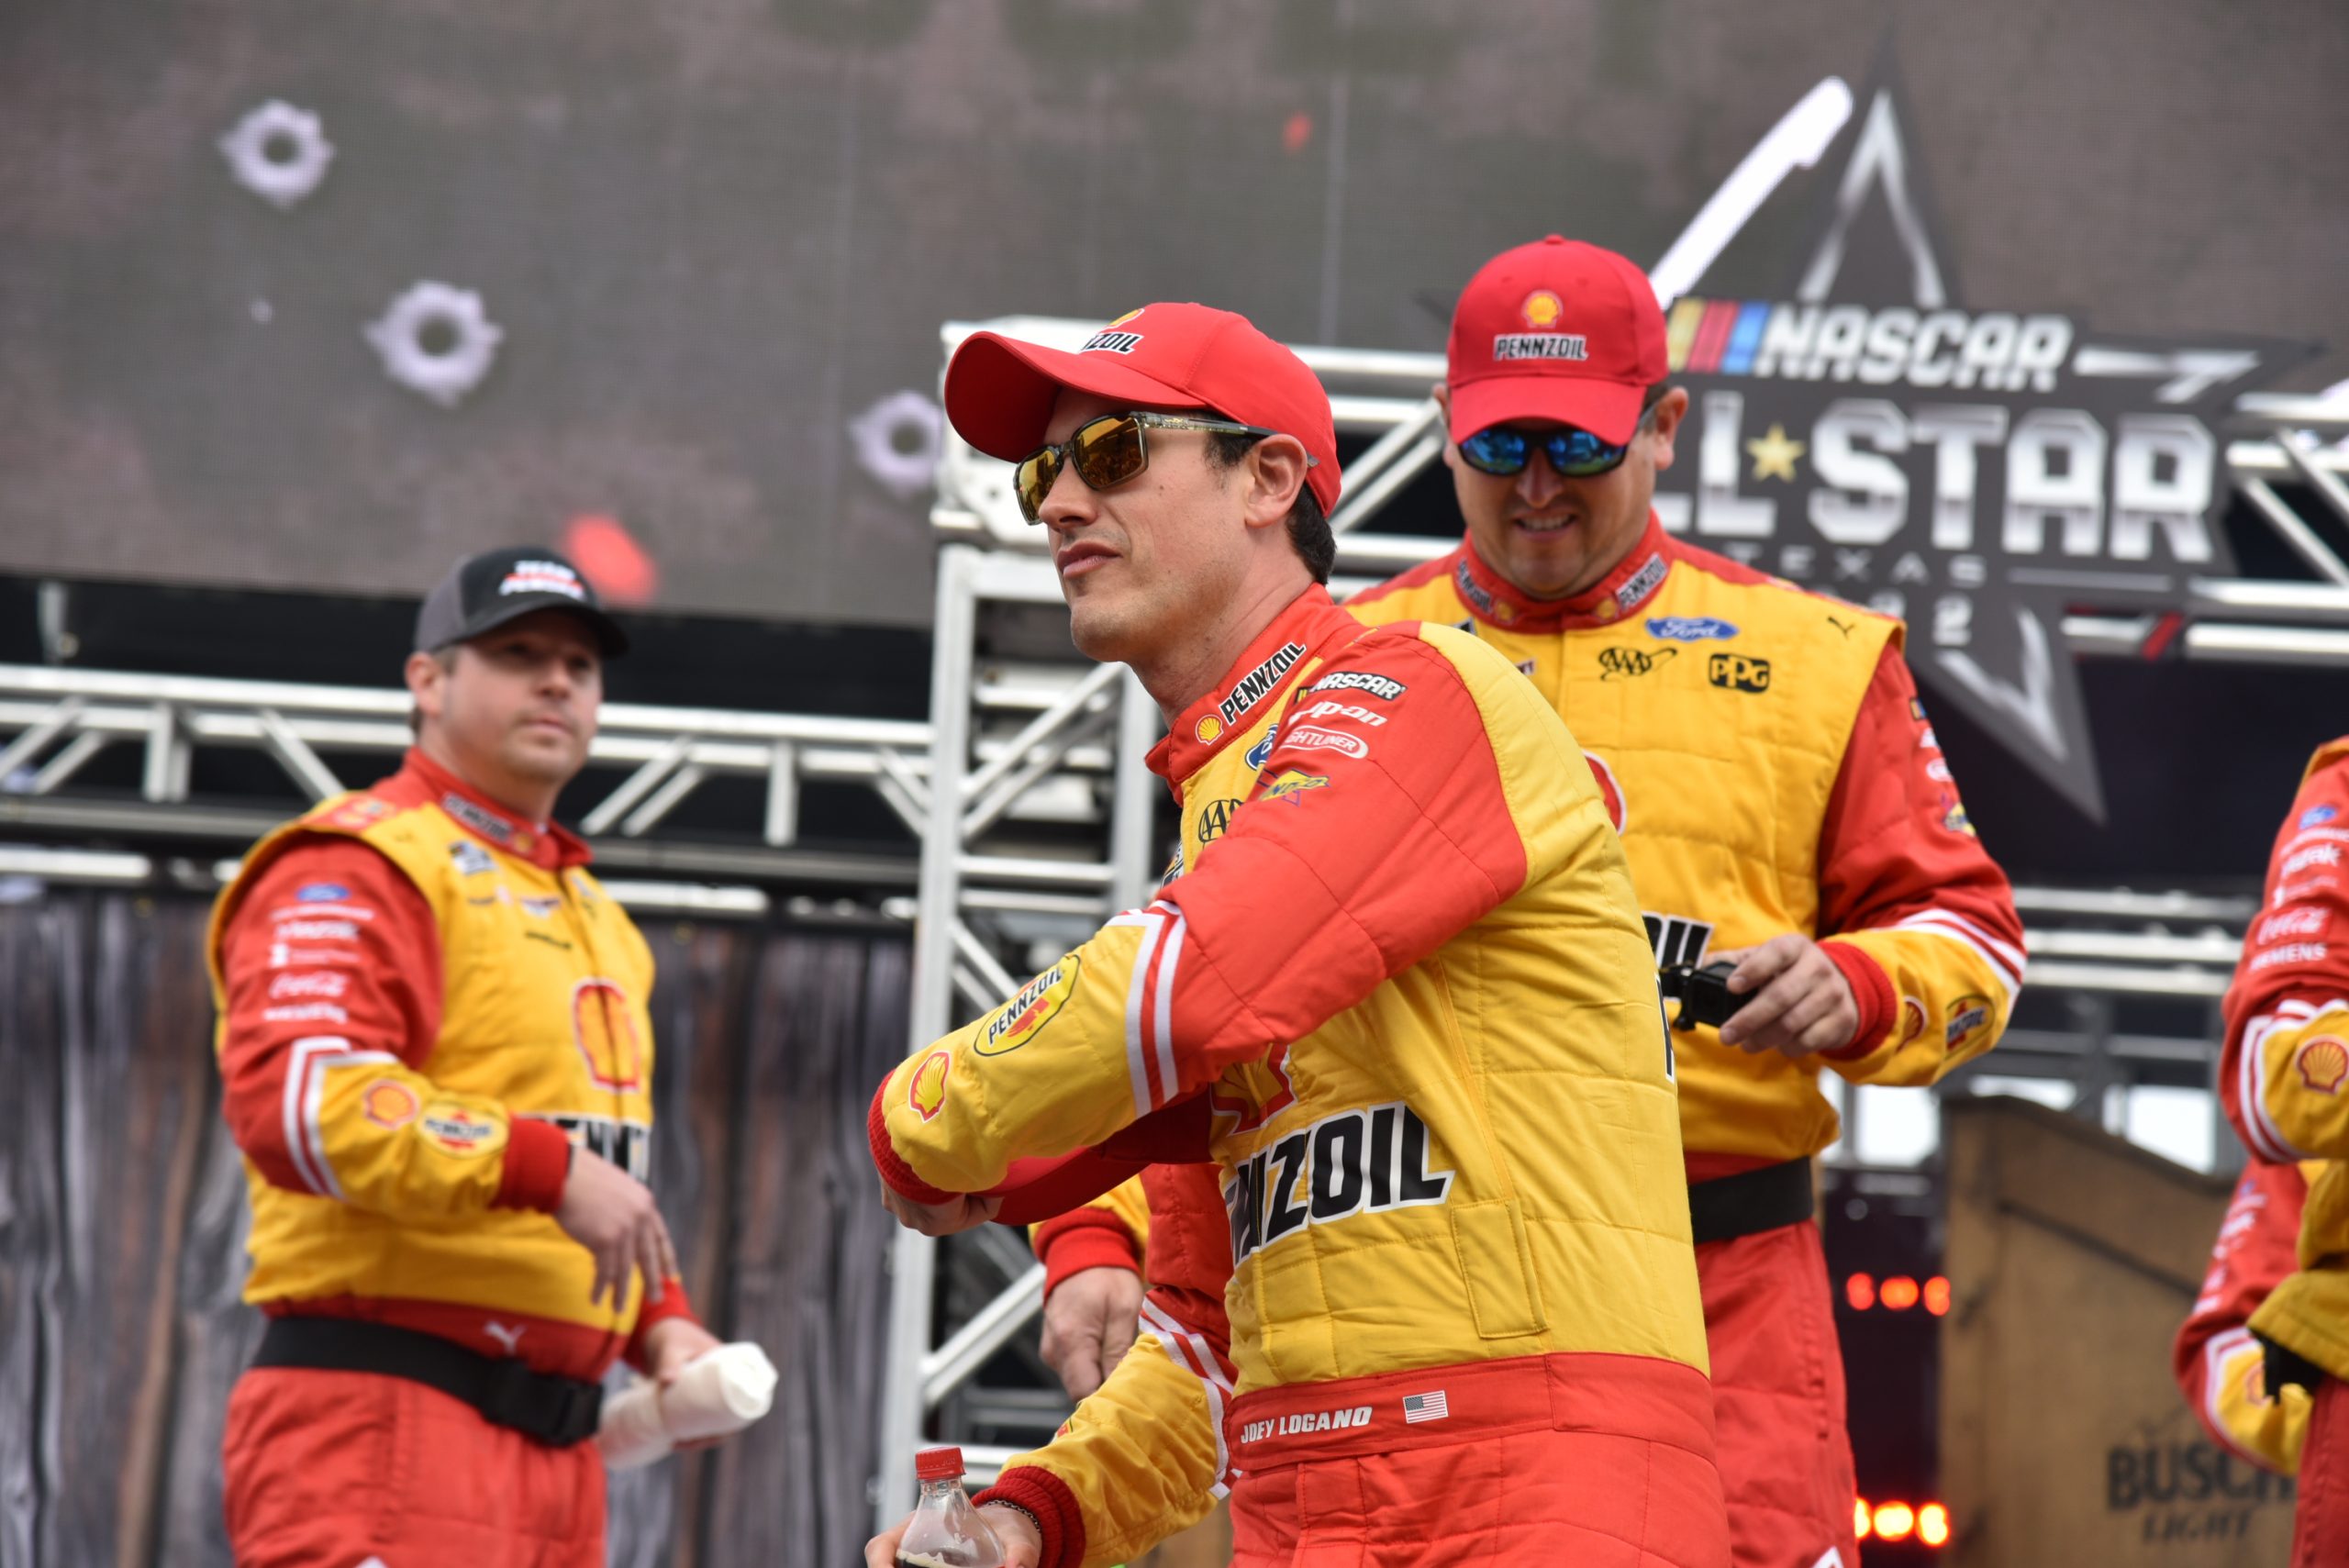 Will Joey Logano and the No. 22 Team Penske crew net their first points race win of 2022? (Photo: Luis Torres | The Podium Finish)